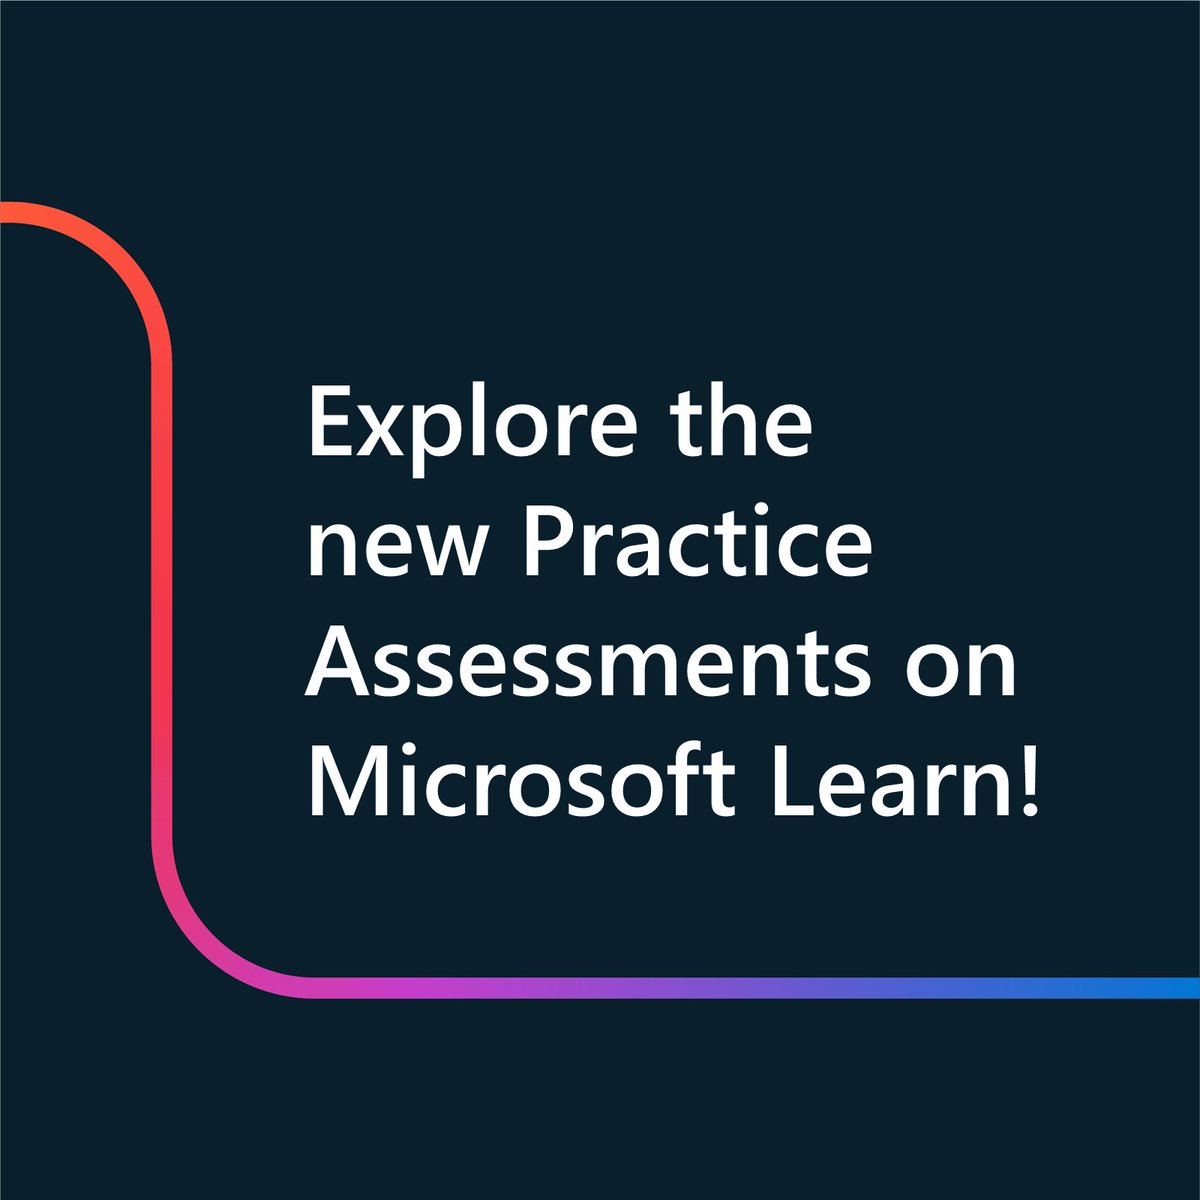 Coming in hot. 🔥 Five brand new Practice Assessments for the following certification exams on Microsoft Learn! 👇 

SC-300: msft.it/6002g51lC

AI-102: msft.it/6009g51mN

DP-300: msft.it/6006g51WK

MB-300: msft.it/6001g51WZ

PL-400: msft.it/6000g51Up